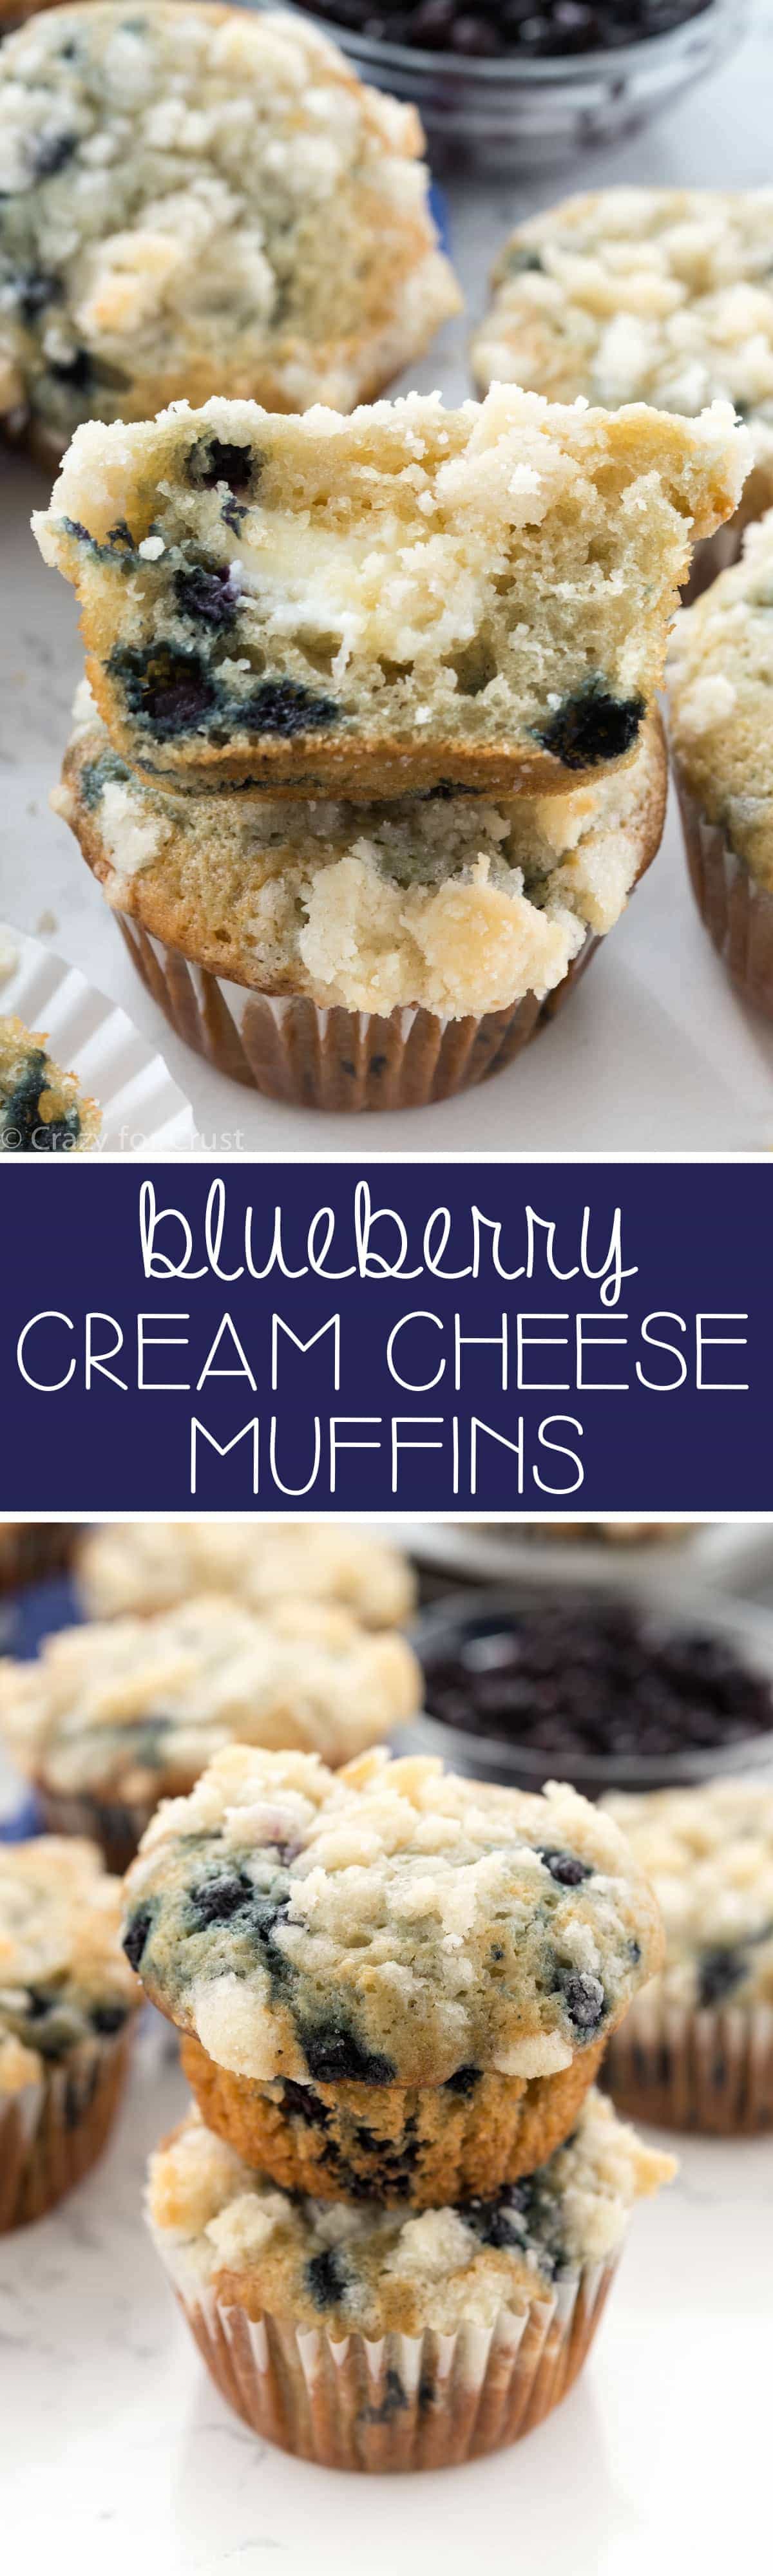 Blueberry Cream Cheese Muffins - this is the PERFECT blueberry muffins recipe. Easy, soft and fluffy, and full of juicy blueberries and cream cheese filling!